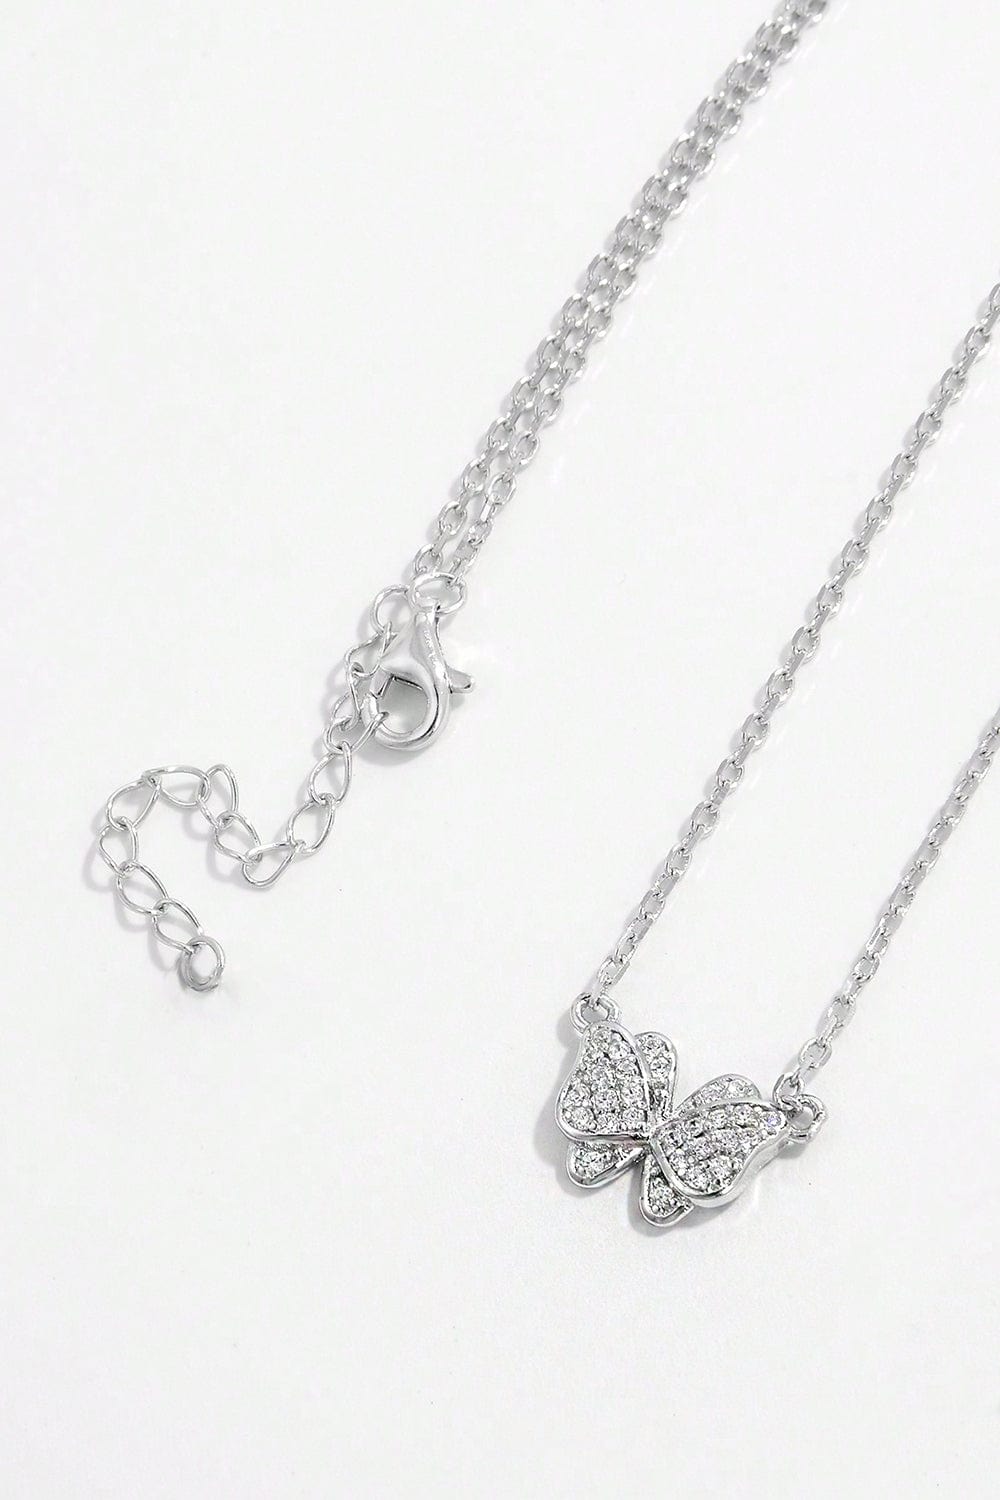 925 Sterling Silver Zircon Butterfly Pendant Necklace. The pendant is crafted in the shape of a butterfly and adorned with sparkling zircon gemstones. The necklace chain complements the pendant, showcasing its delicate beauty. This accessory exudes elegance and charm, perfect for adding a touch of sophistication to any outfit.